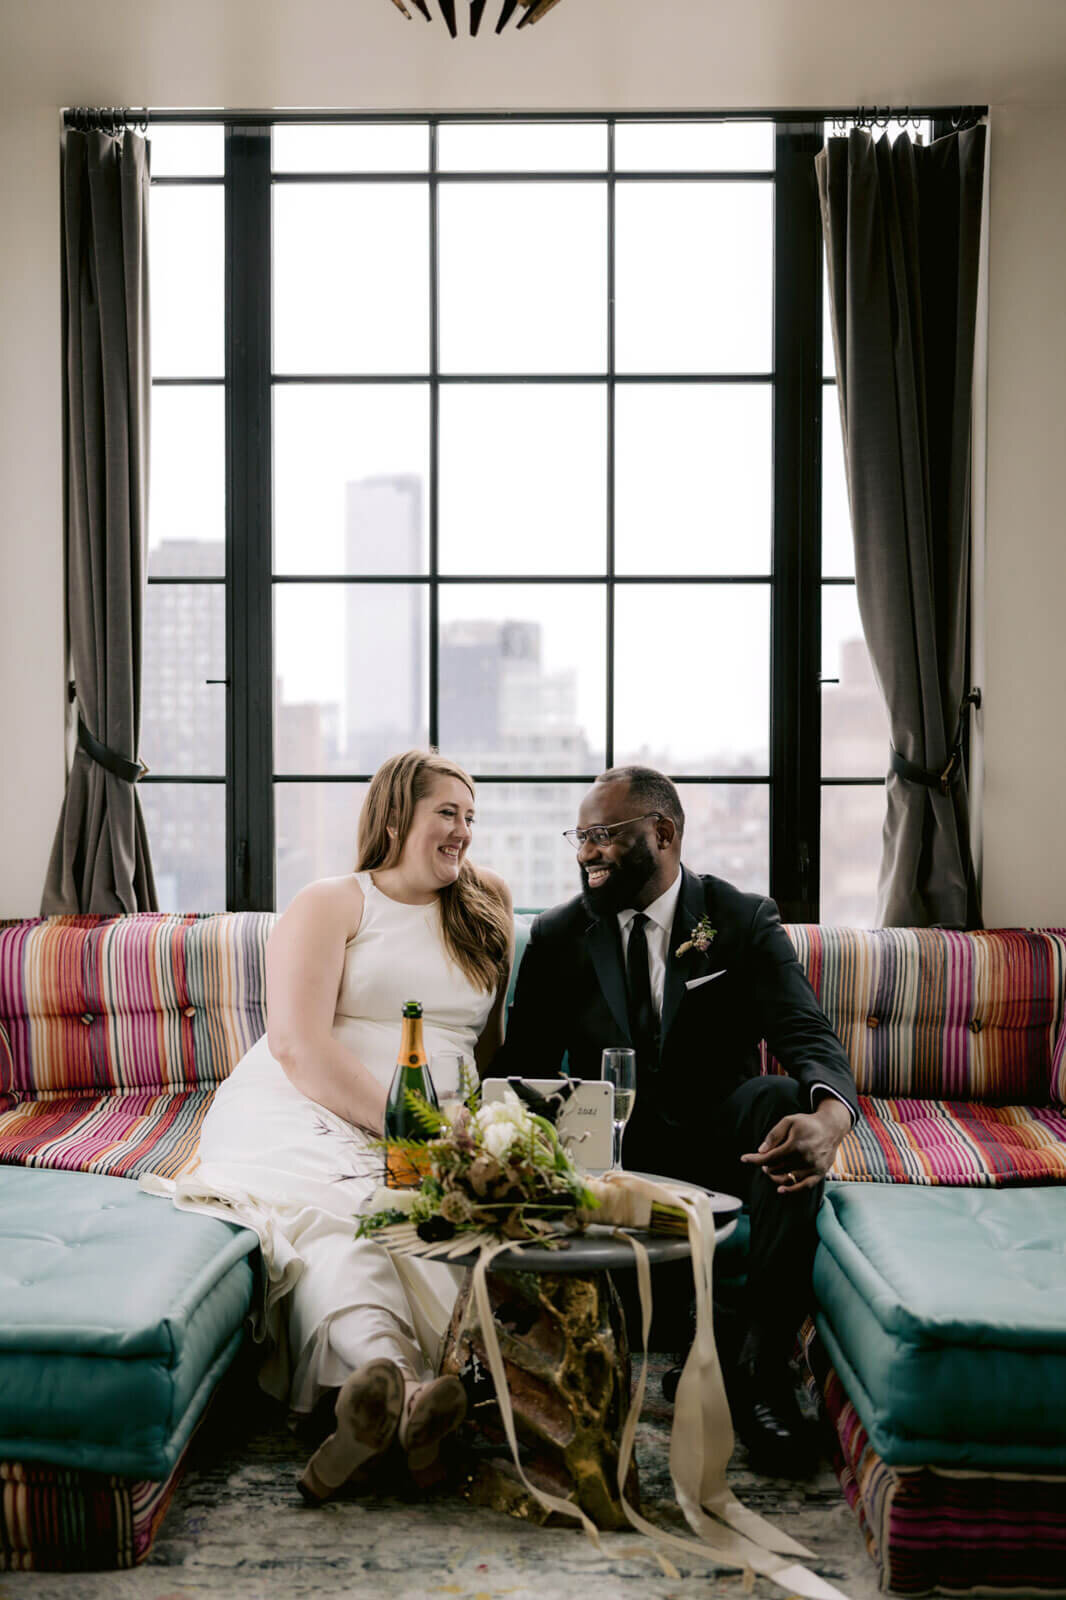 The bride and the groom are happily seated on a couch with a bottle of champagne inside a Ludlow Hotel room in NYC.